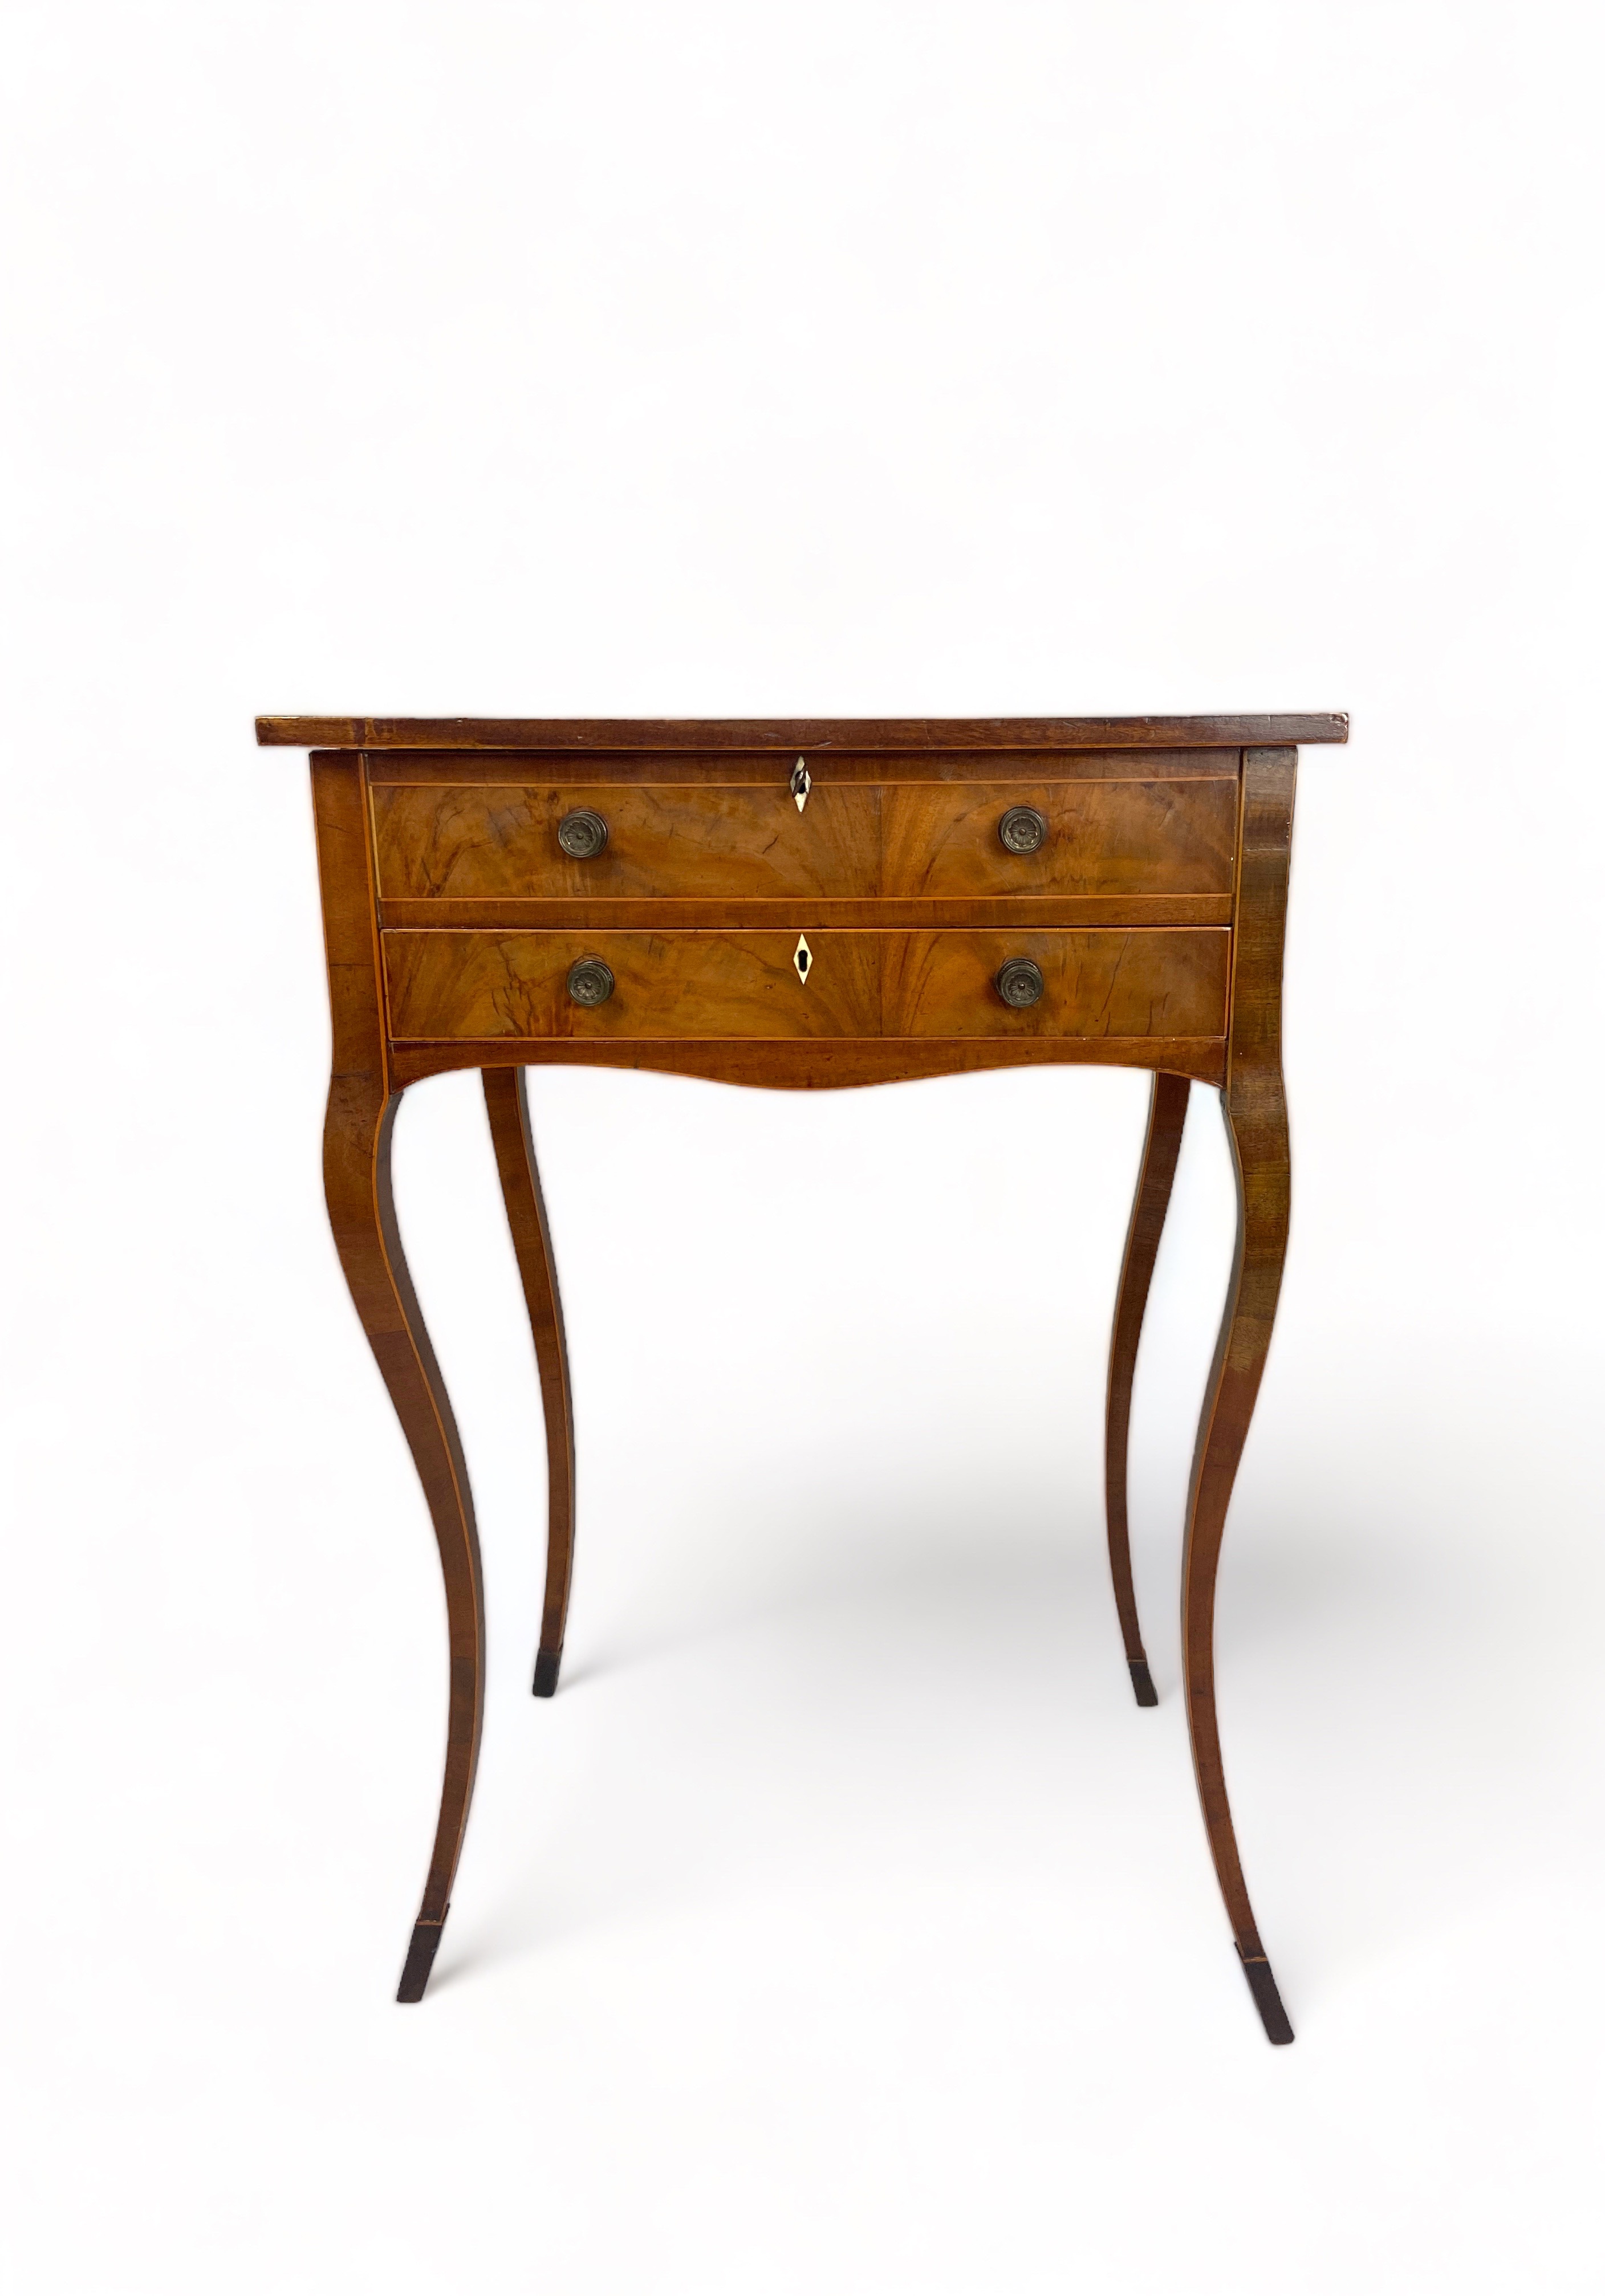 A George III mahogany and tulipwood banded and chequerbanded marquetry work table - Image 7 of 11